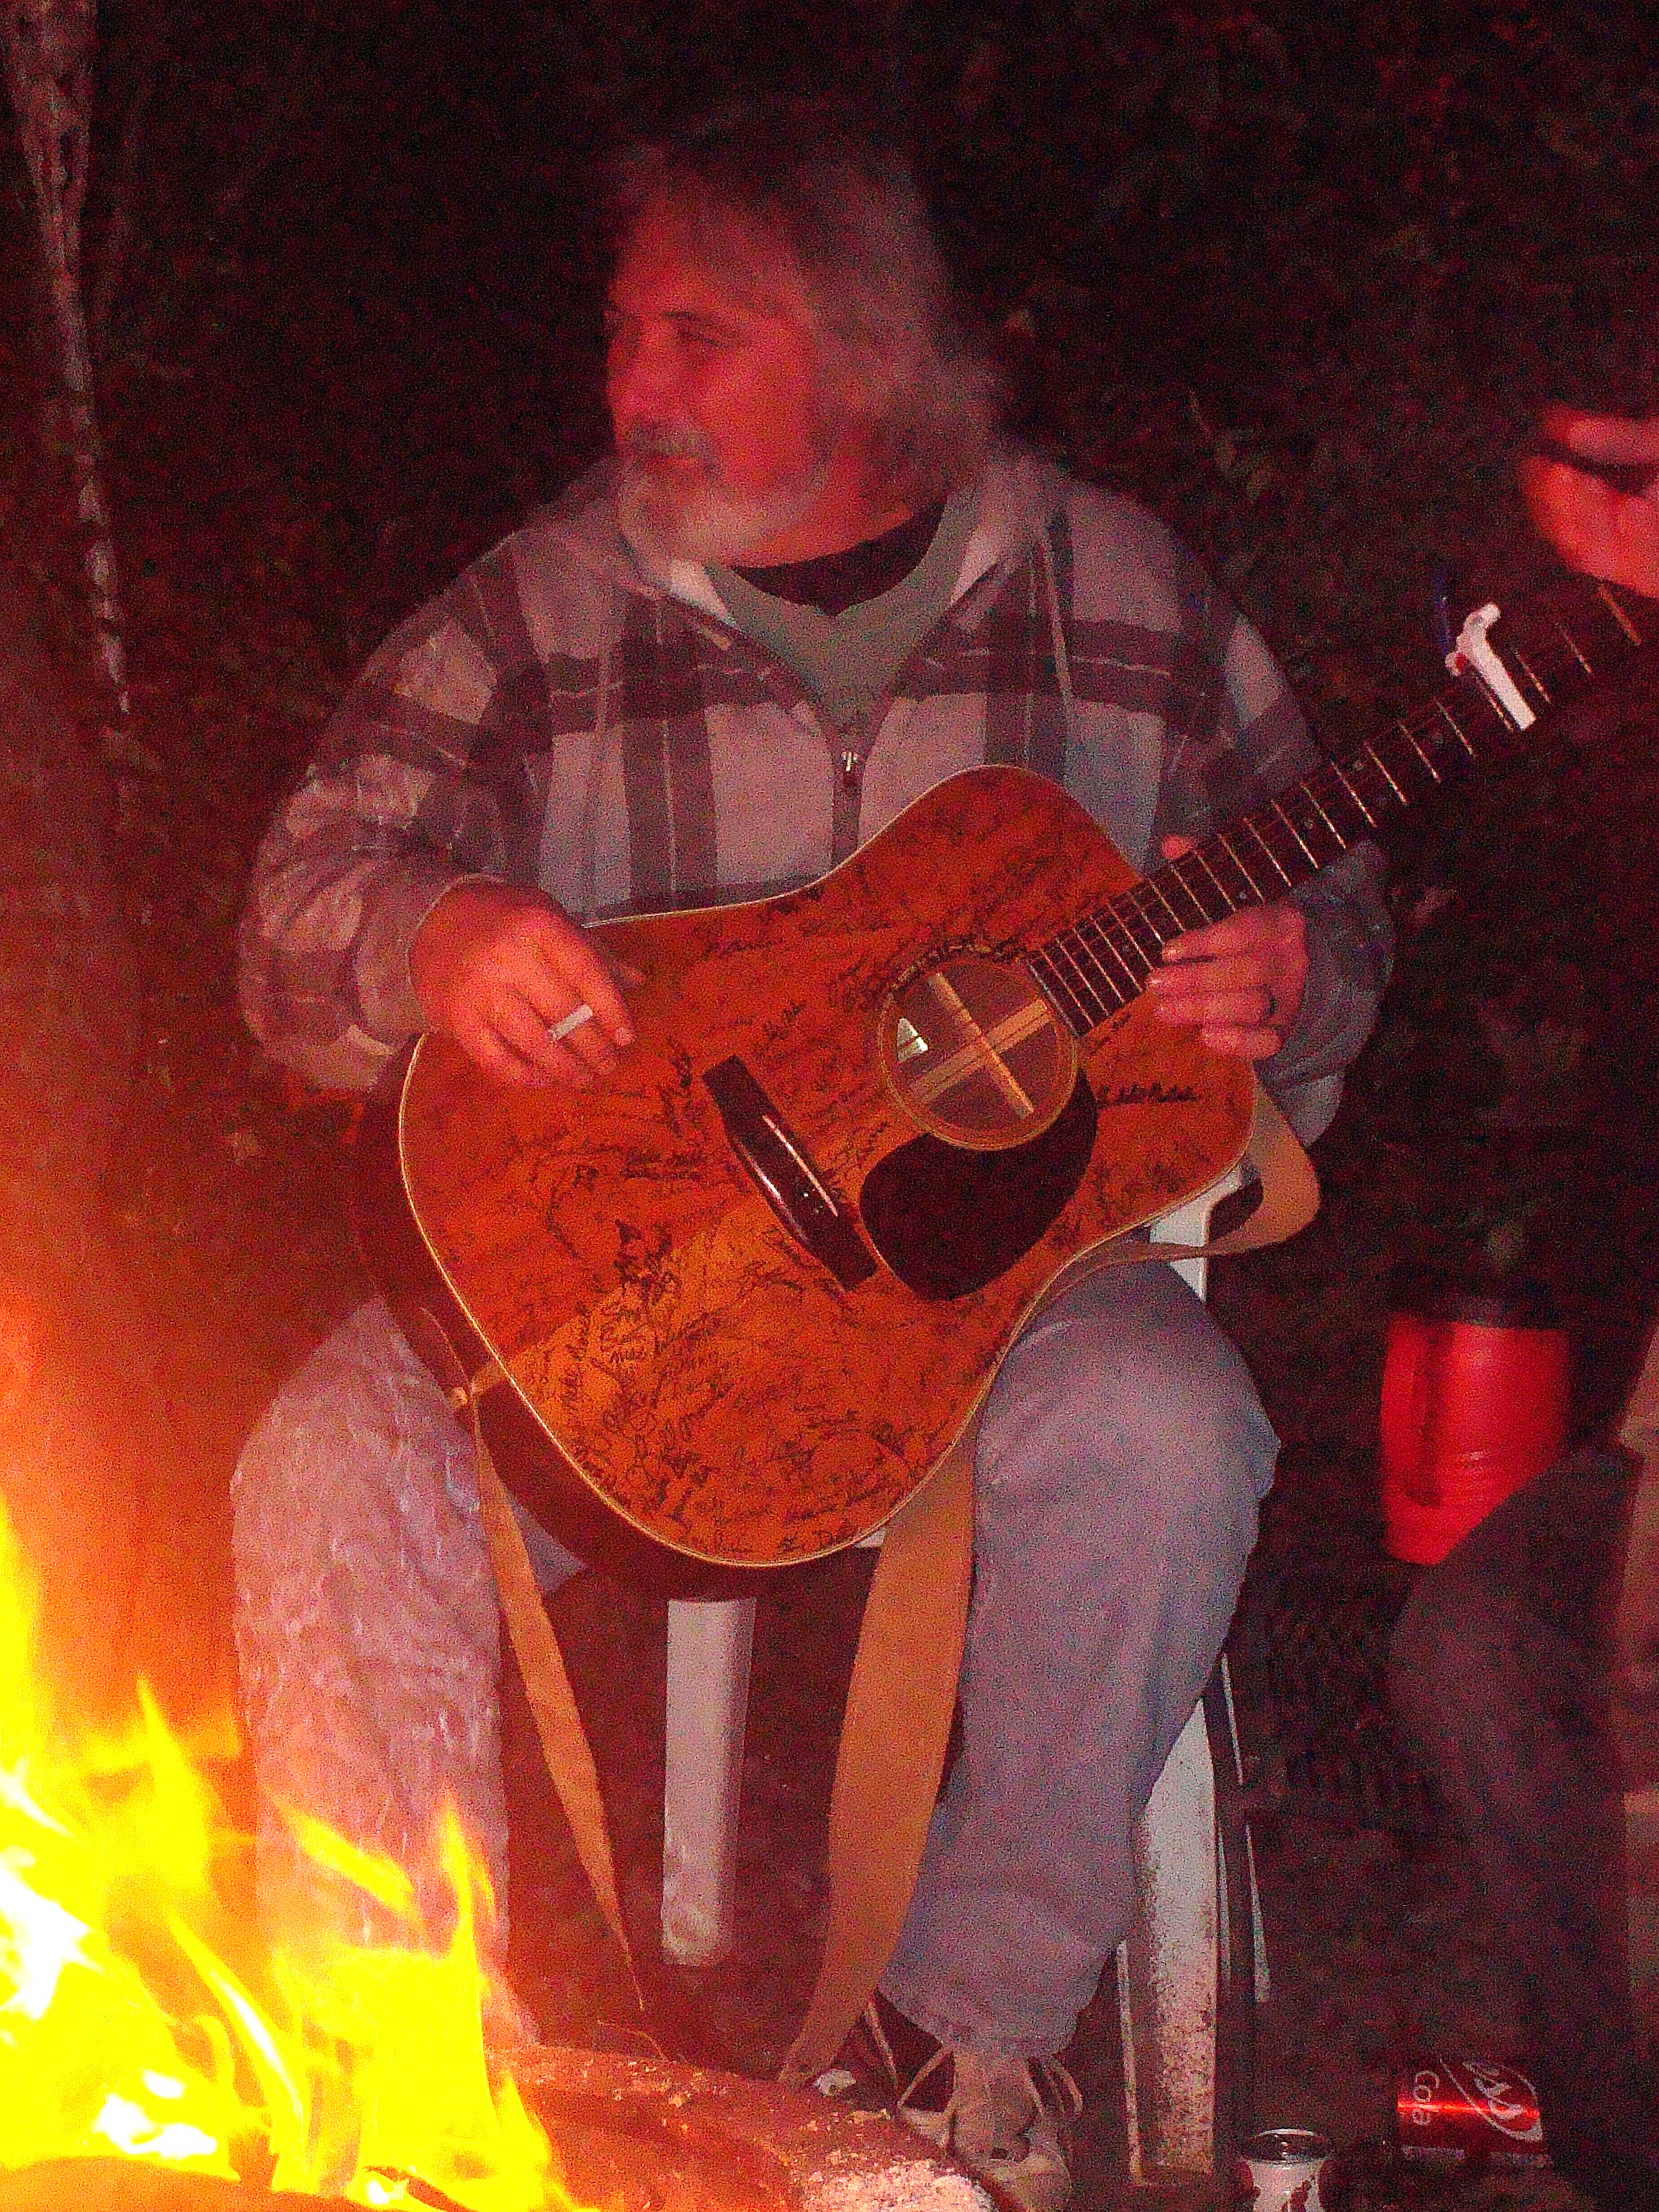 Keith plays by the fire